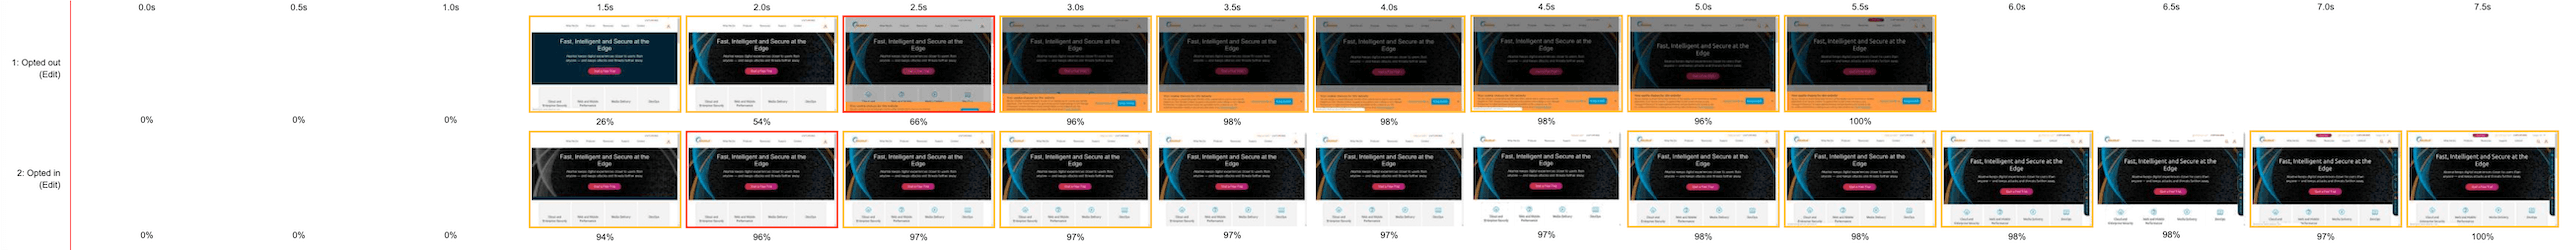 Filmstrip images showing cookie opt-in is slower